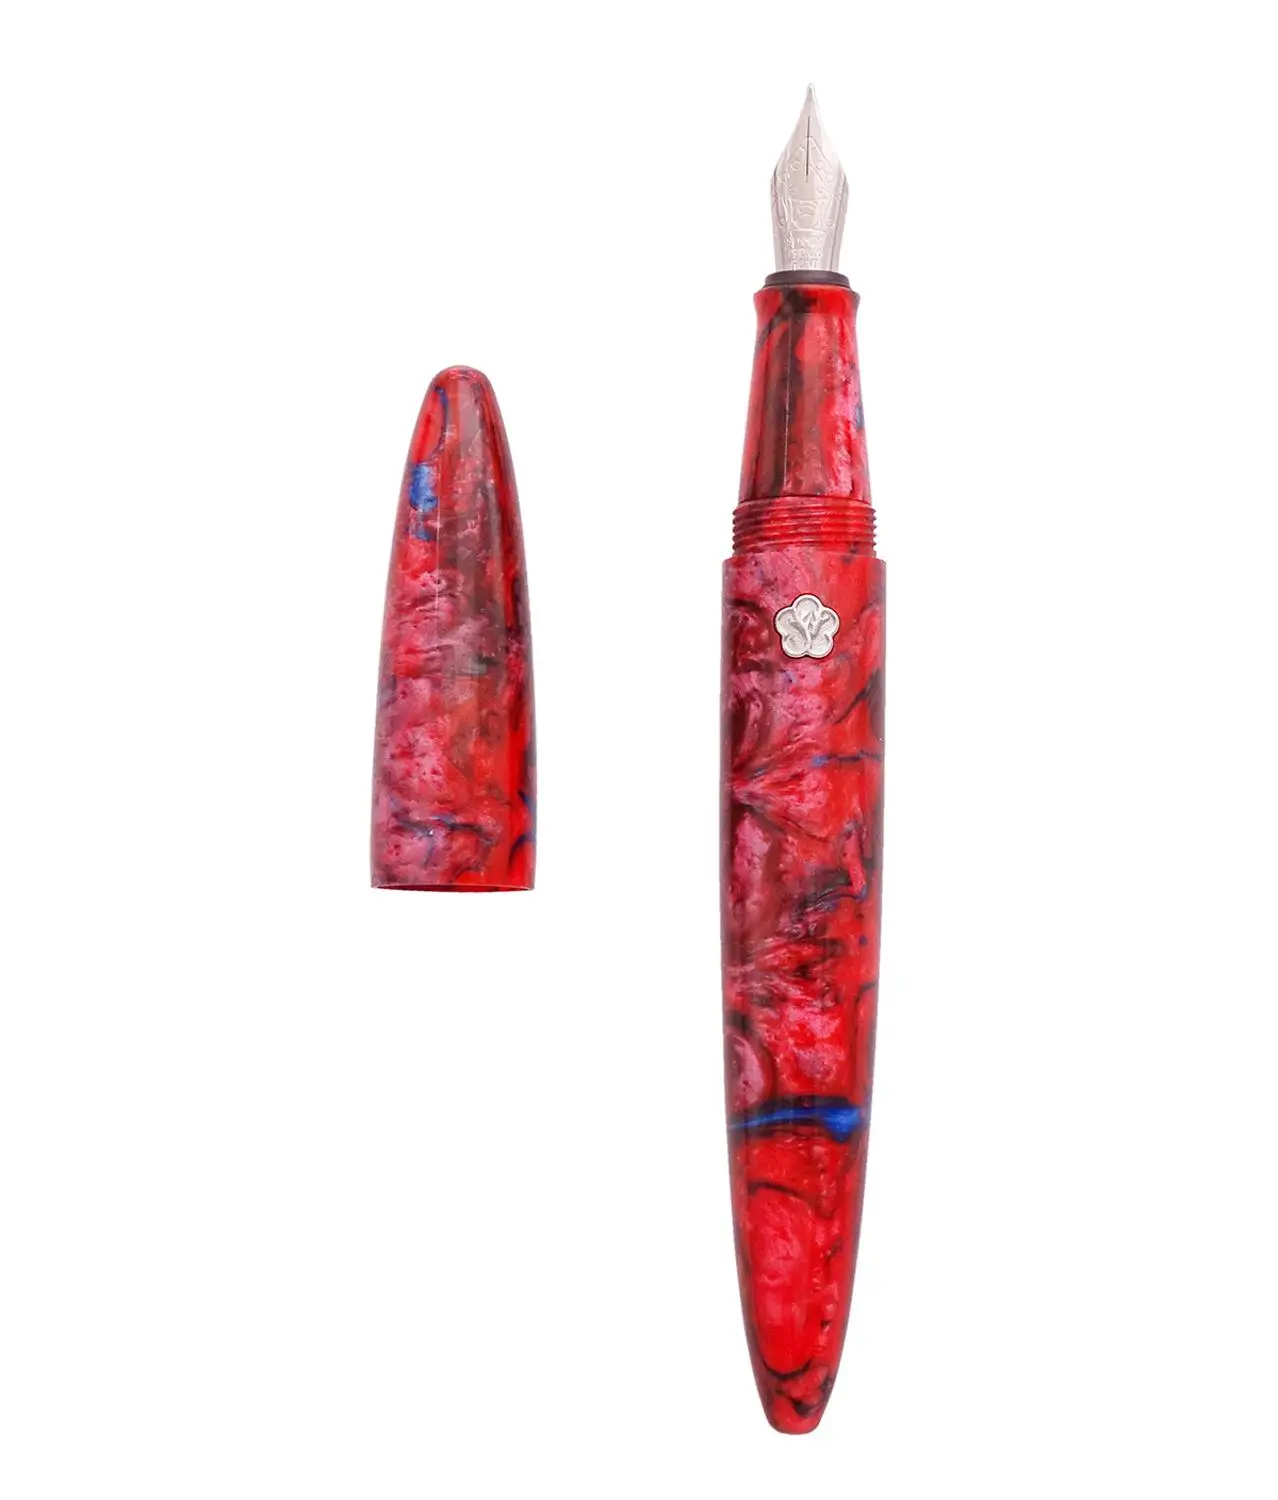 LIY (Live In You) FUTURE Series Awesome Resin Fountain Pen Red Flame Schmidt EF/F Nib Writing Ink Pen for Gift Collection